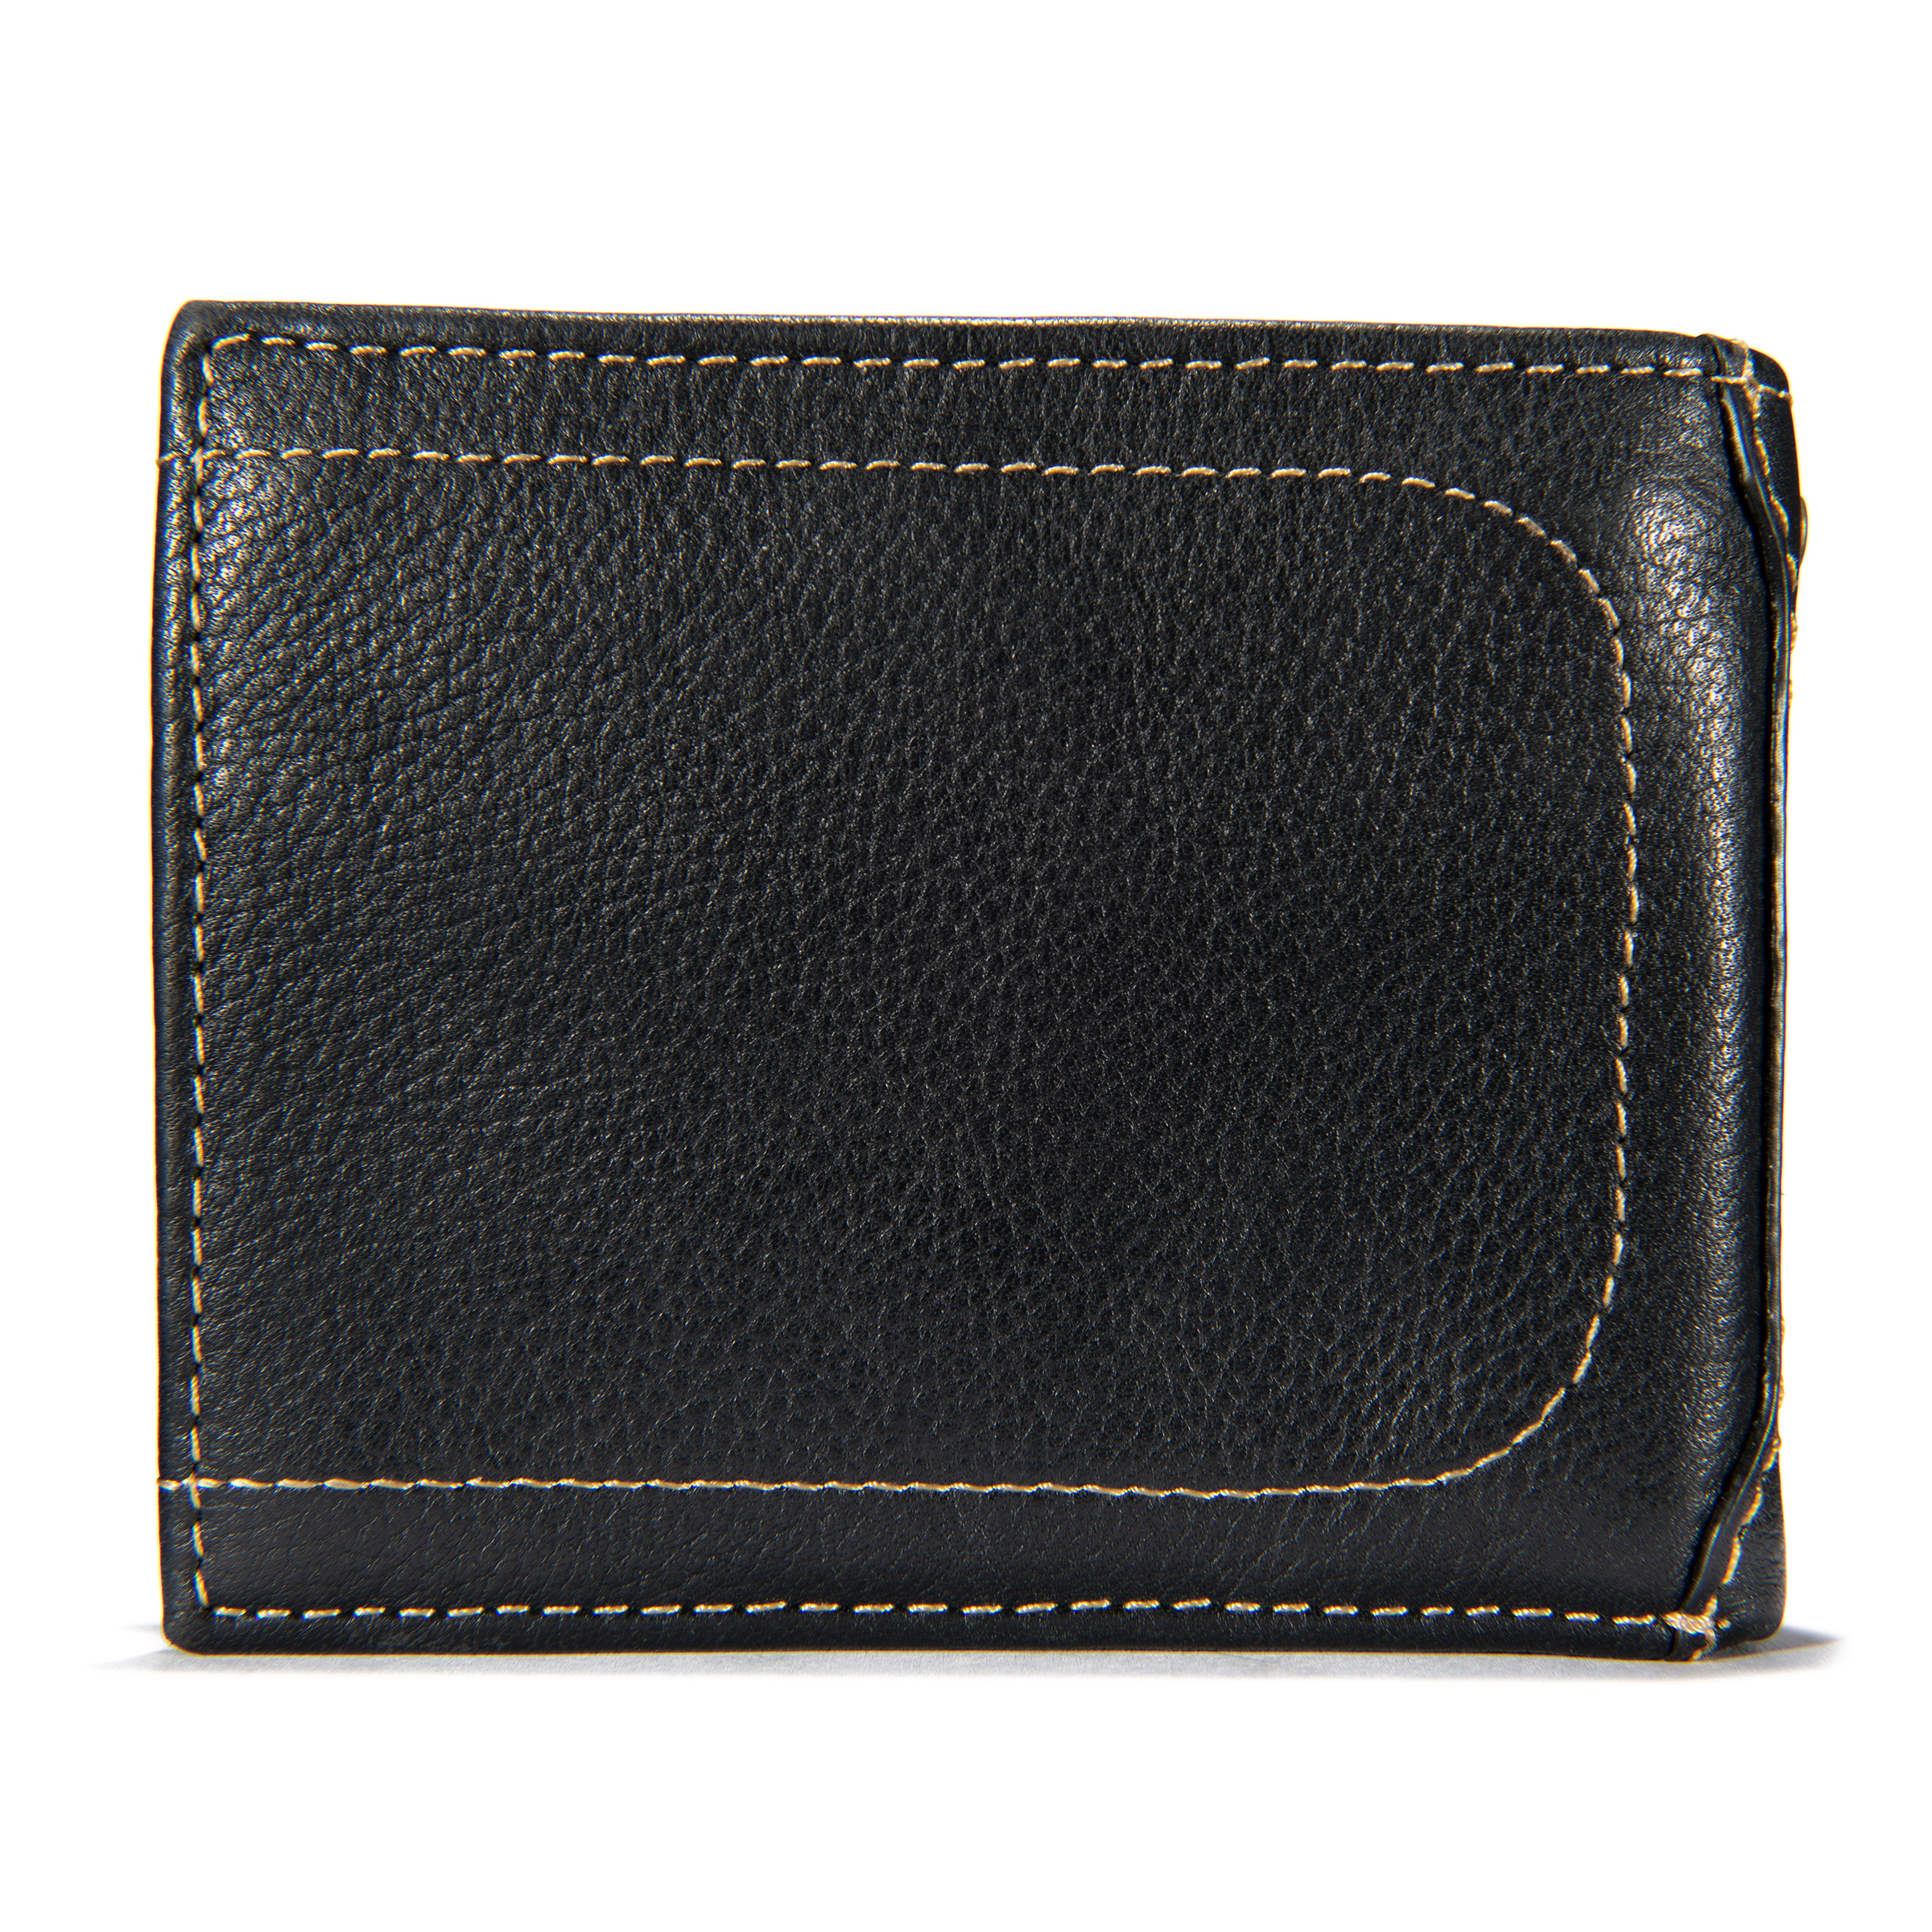 Picture of Carhartt B0000210 Mens Pebble Leather Passcase Wallet